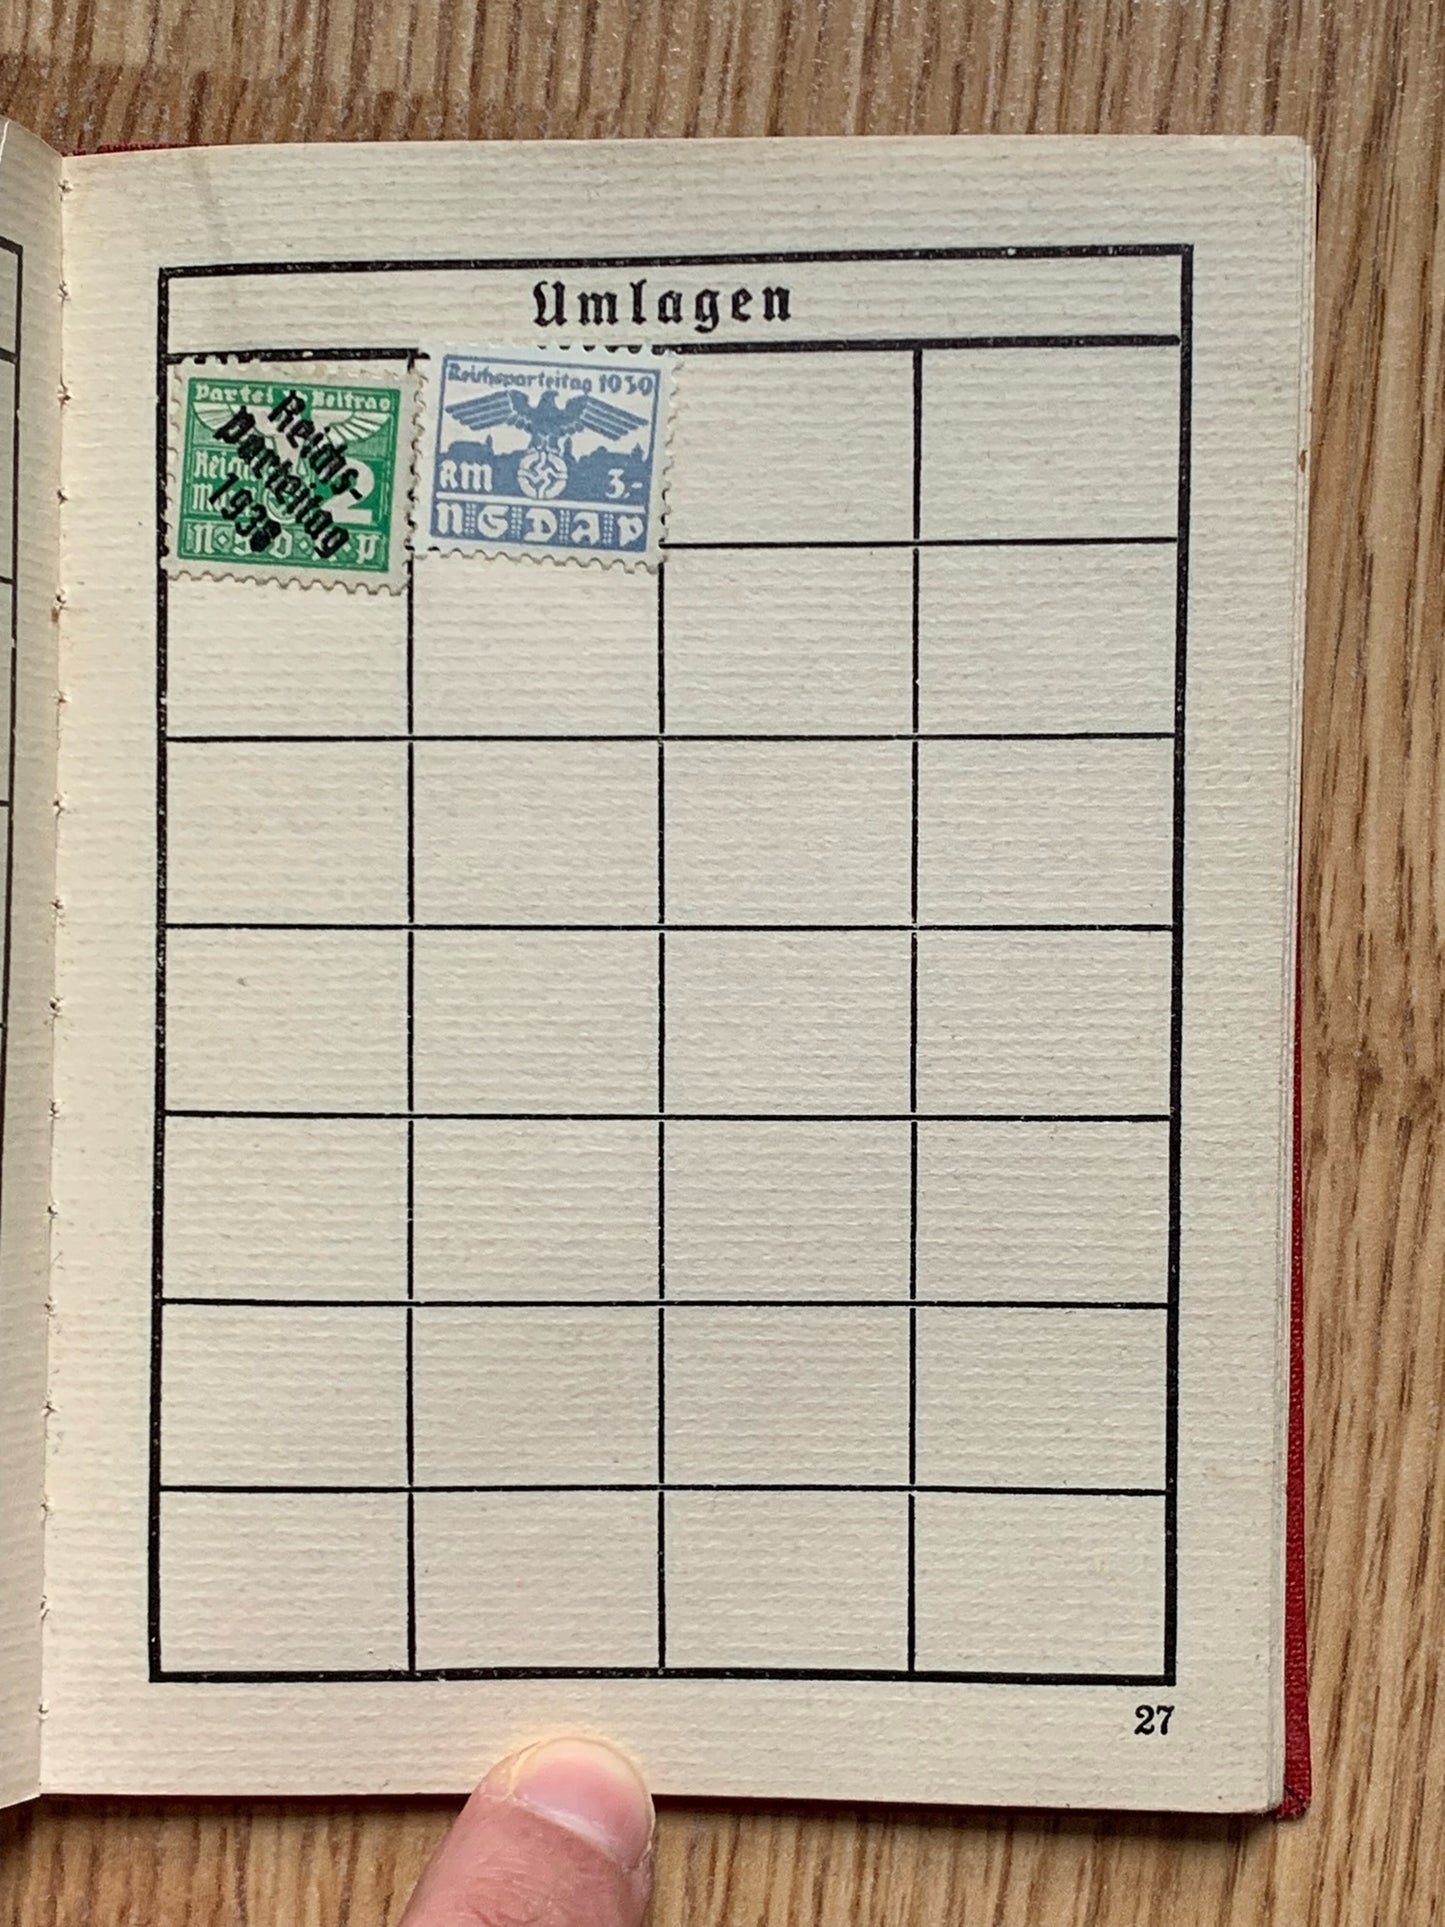 NSDAP membership booklet - Blockleiter official, Rudolf Hess reference